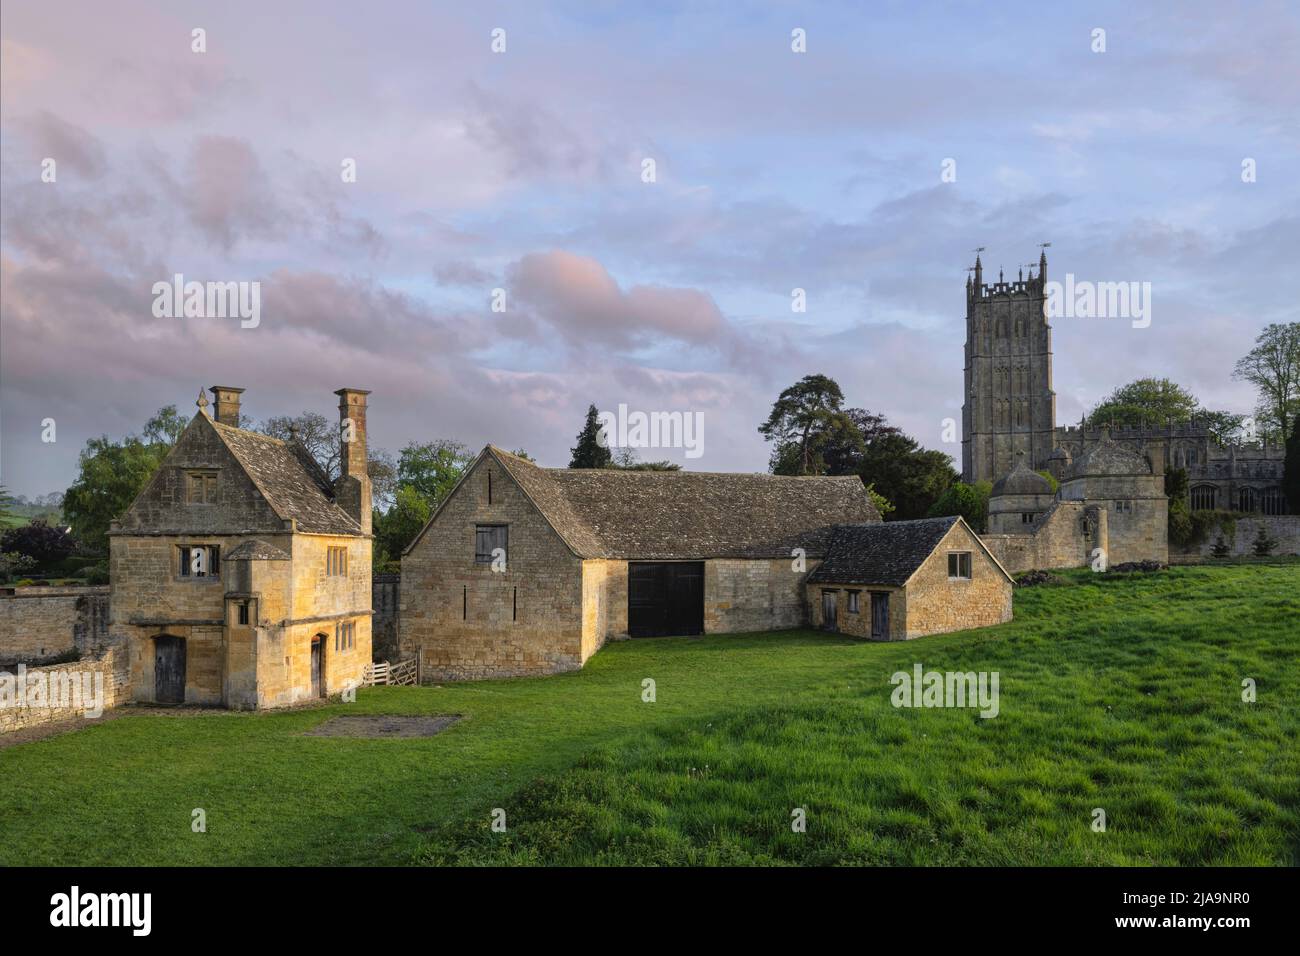 Church and Banqueting House at Chipping Campden, Cotswolds, England. Stock Photo